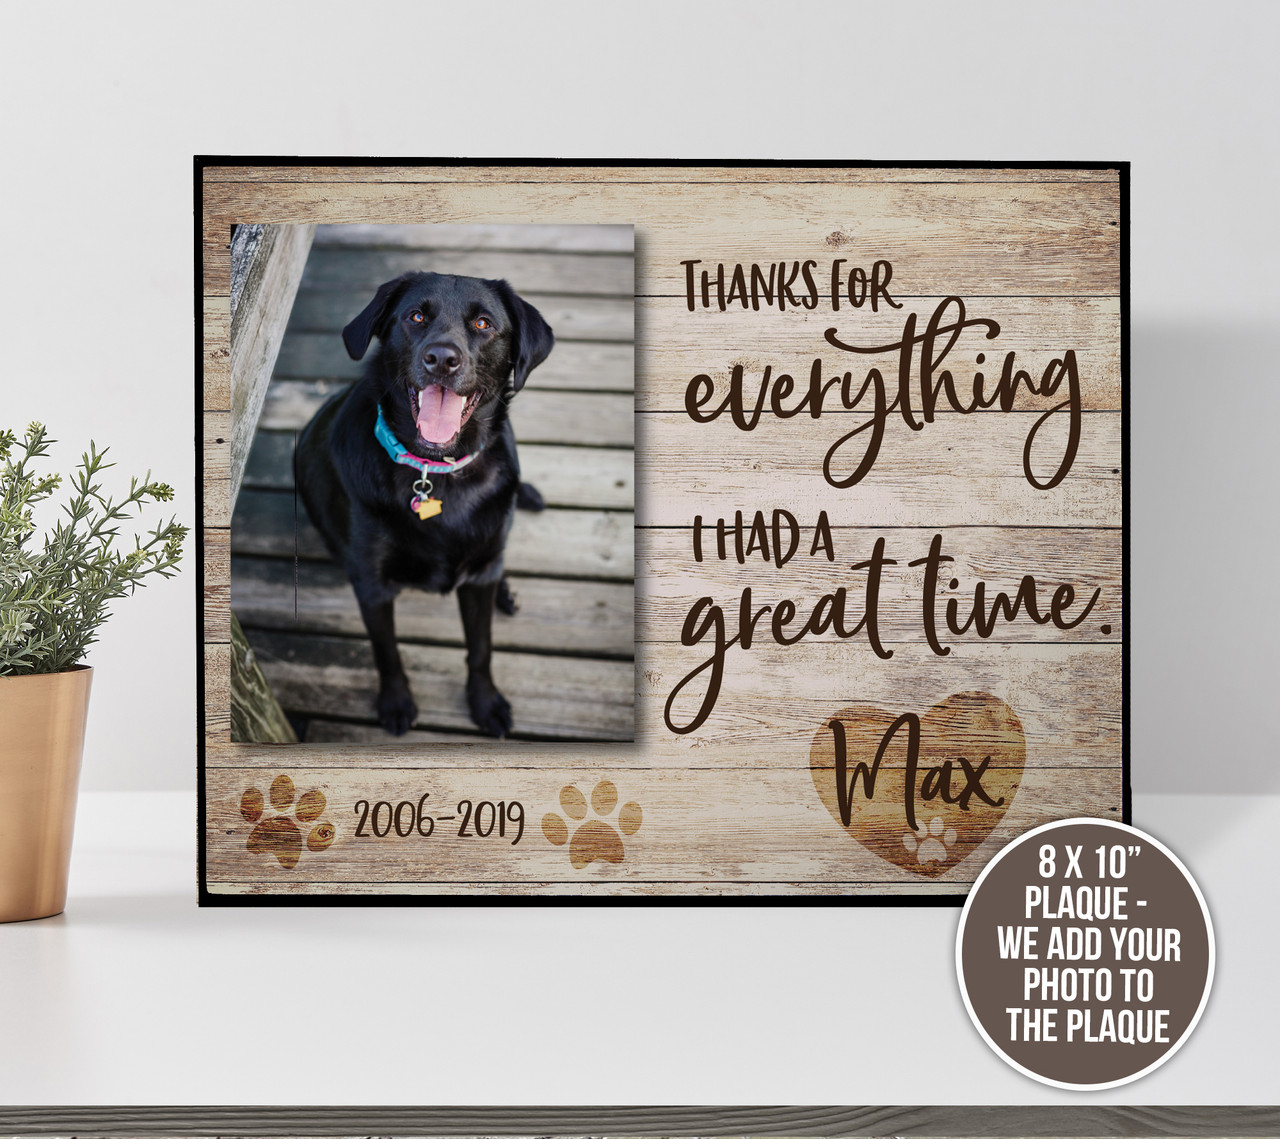 Pet memorial personalized photo frame